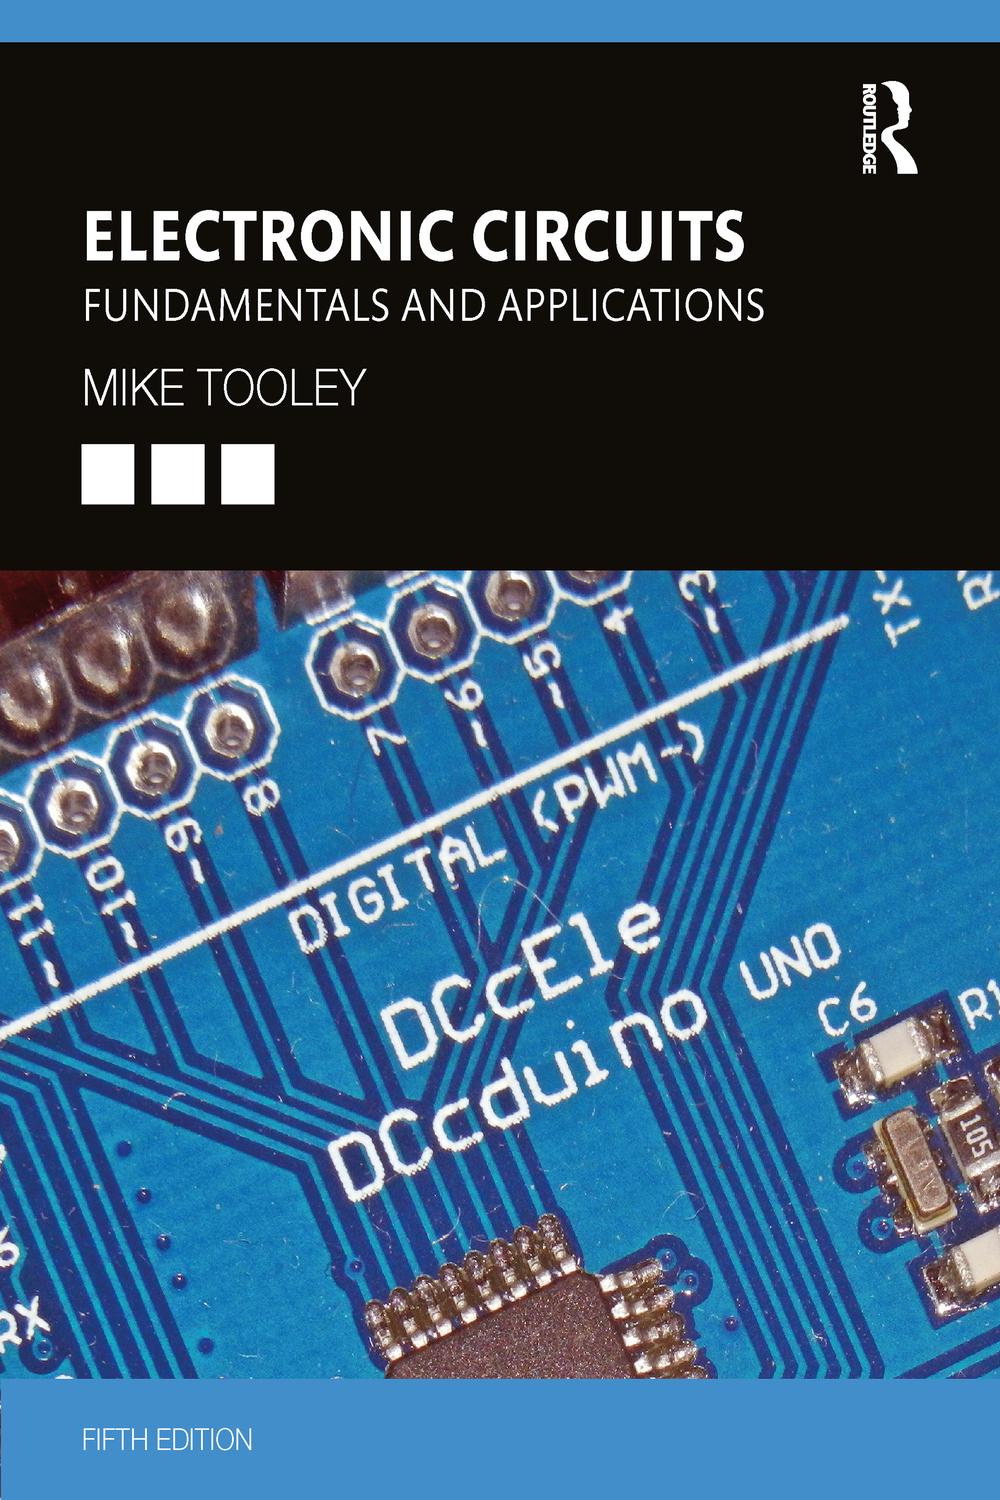 PDF] Electronic Circuits by Mike Tooley eBook | Perlego